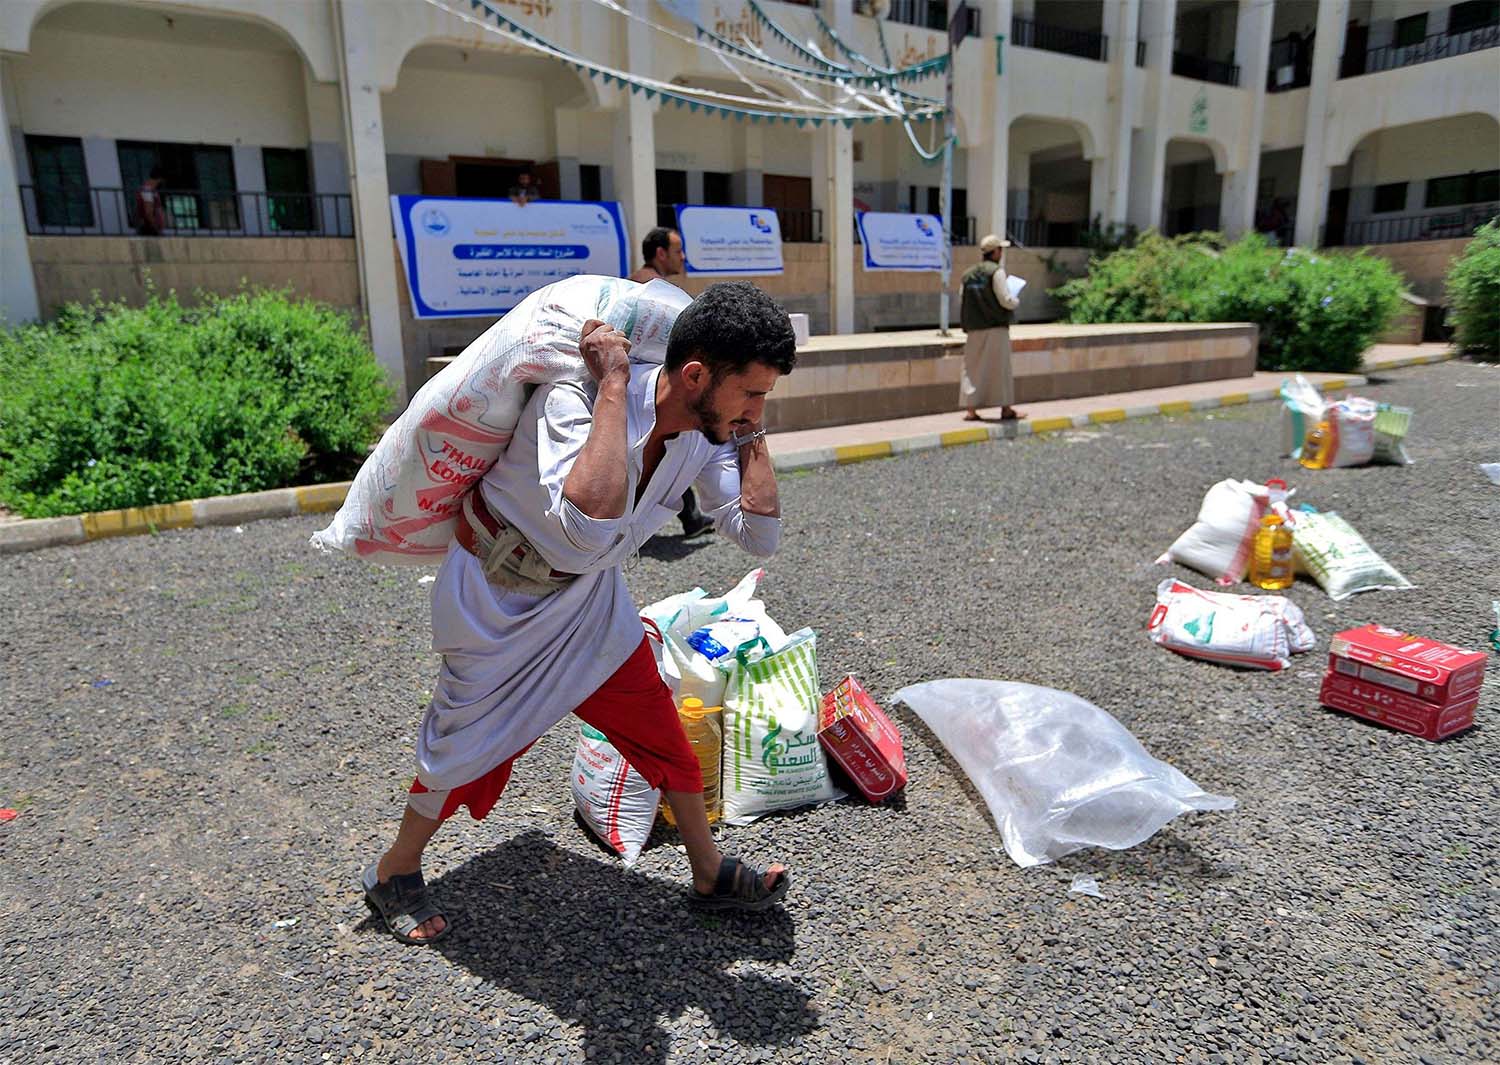 A Yemeni man carries a portion of food aid in Sanaa